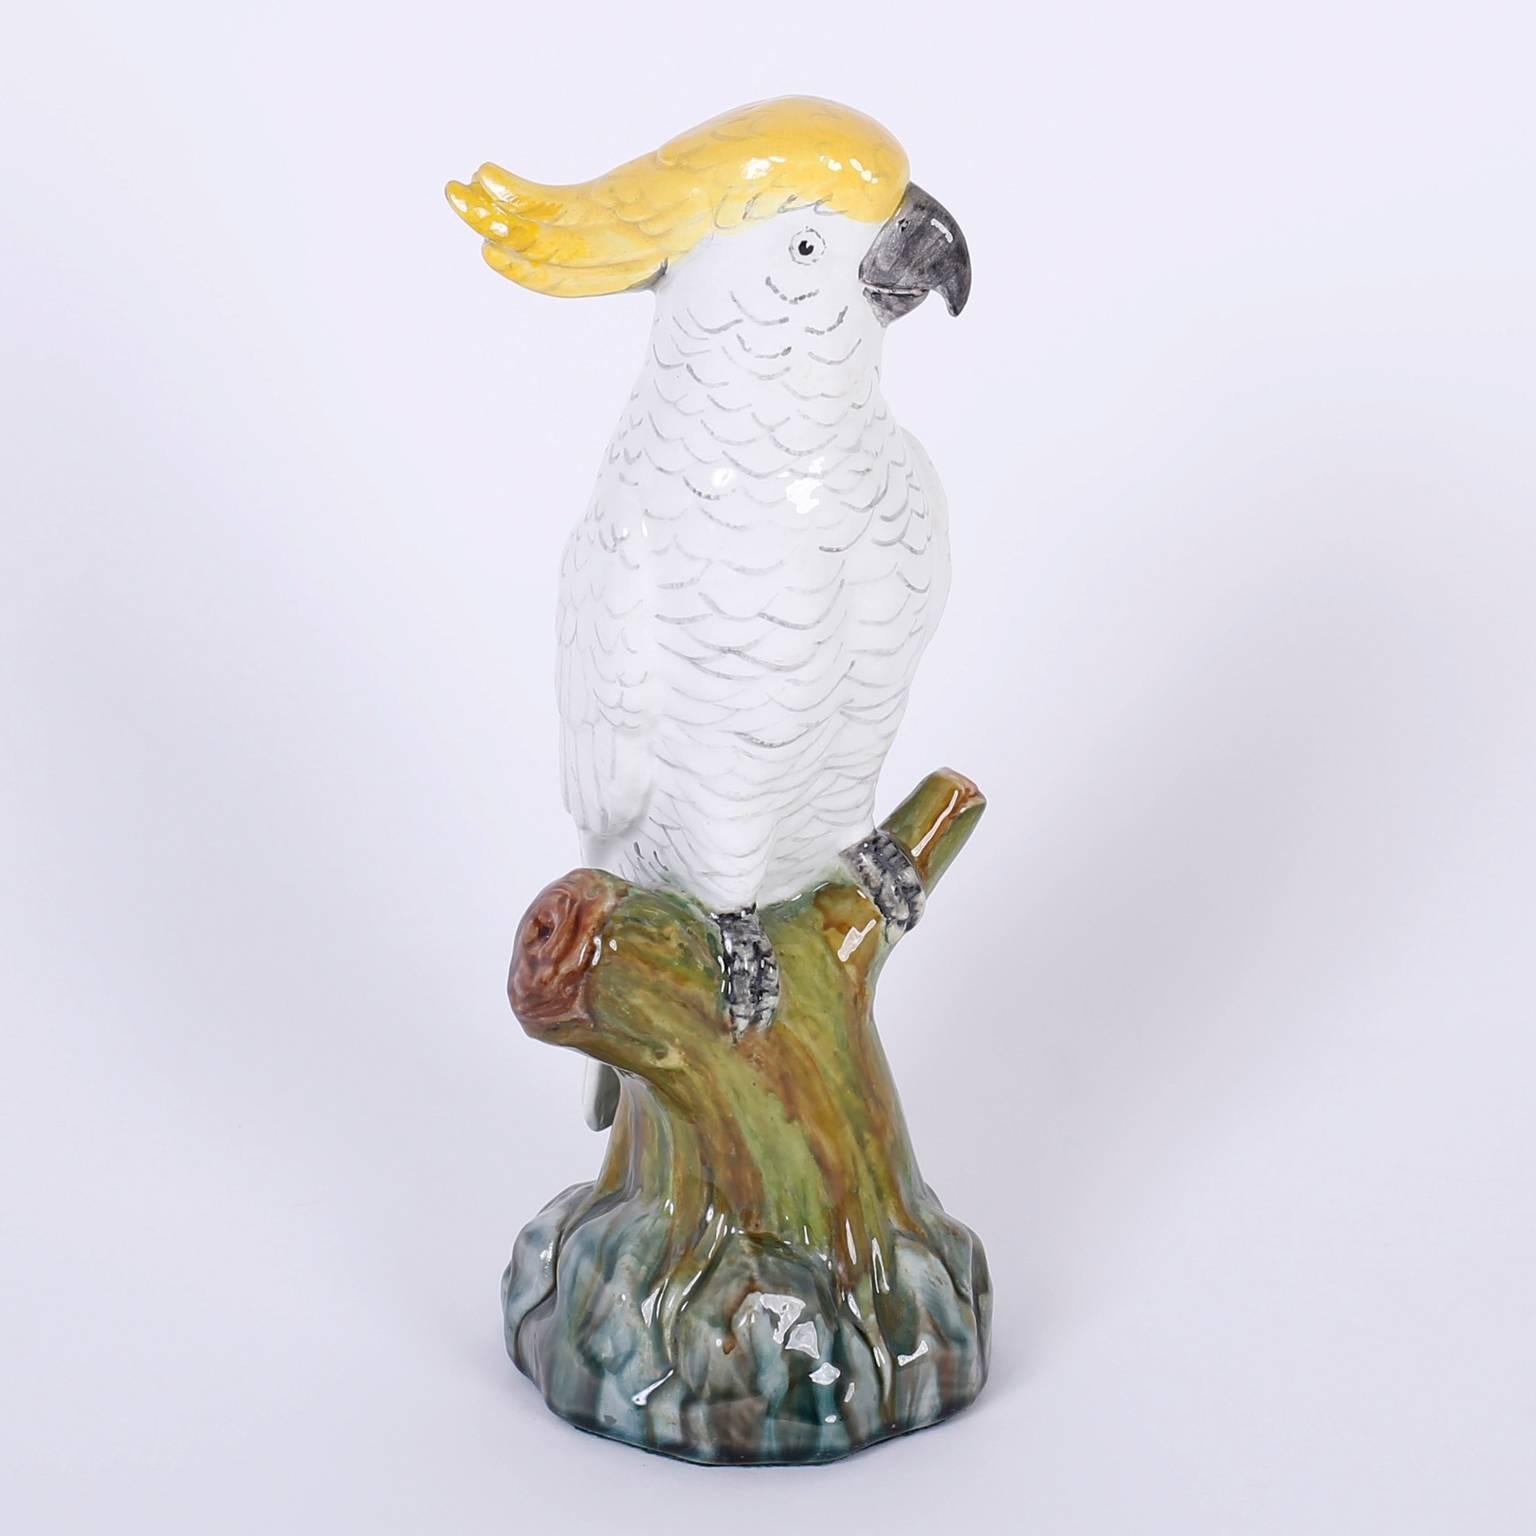 Amusing, decorated and glazed terra cotta parrots or cockatoos who seem rather comfortable with each other, both perched on a tree trunk signed on the underside Mintons England.

Left bird measures H 12.5 x W 4.5 x D 4.5
Right bird measures H